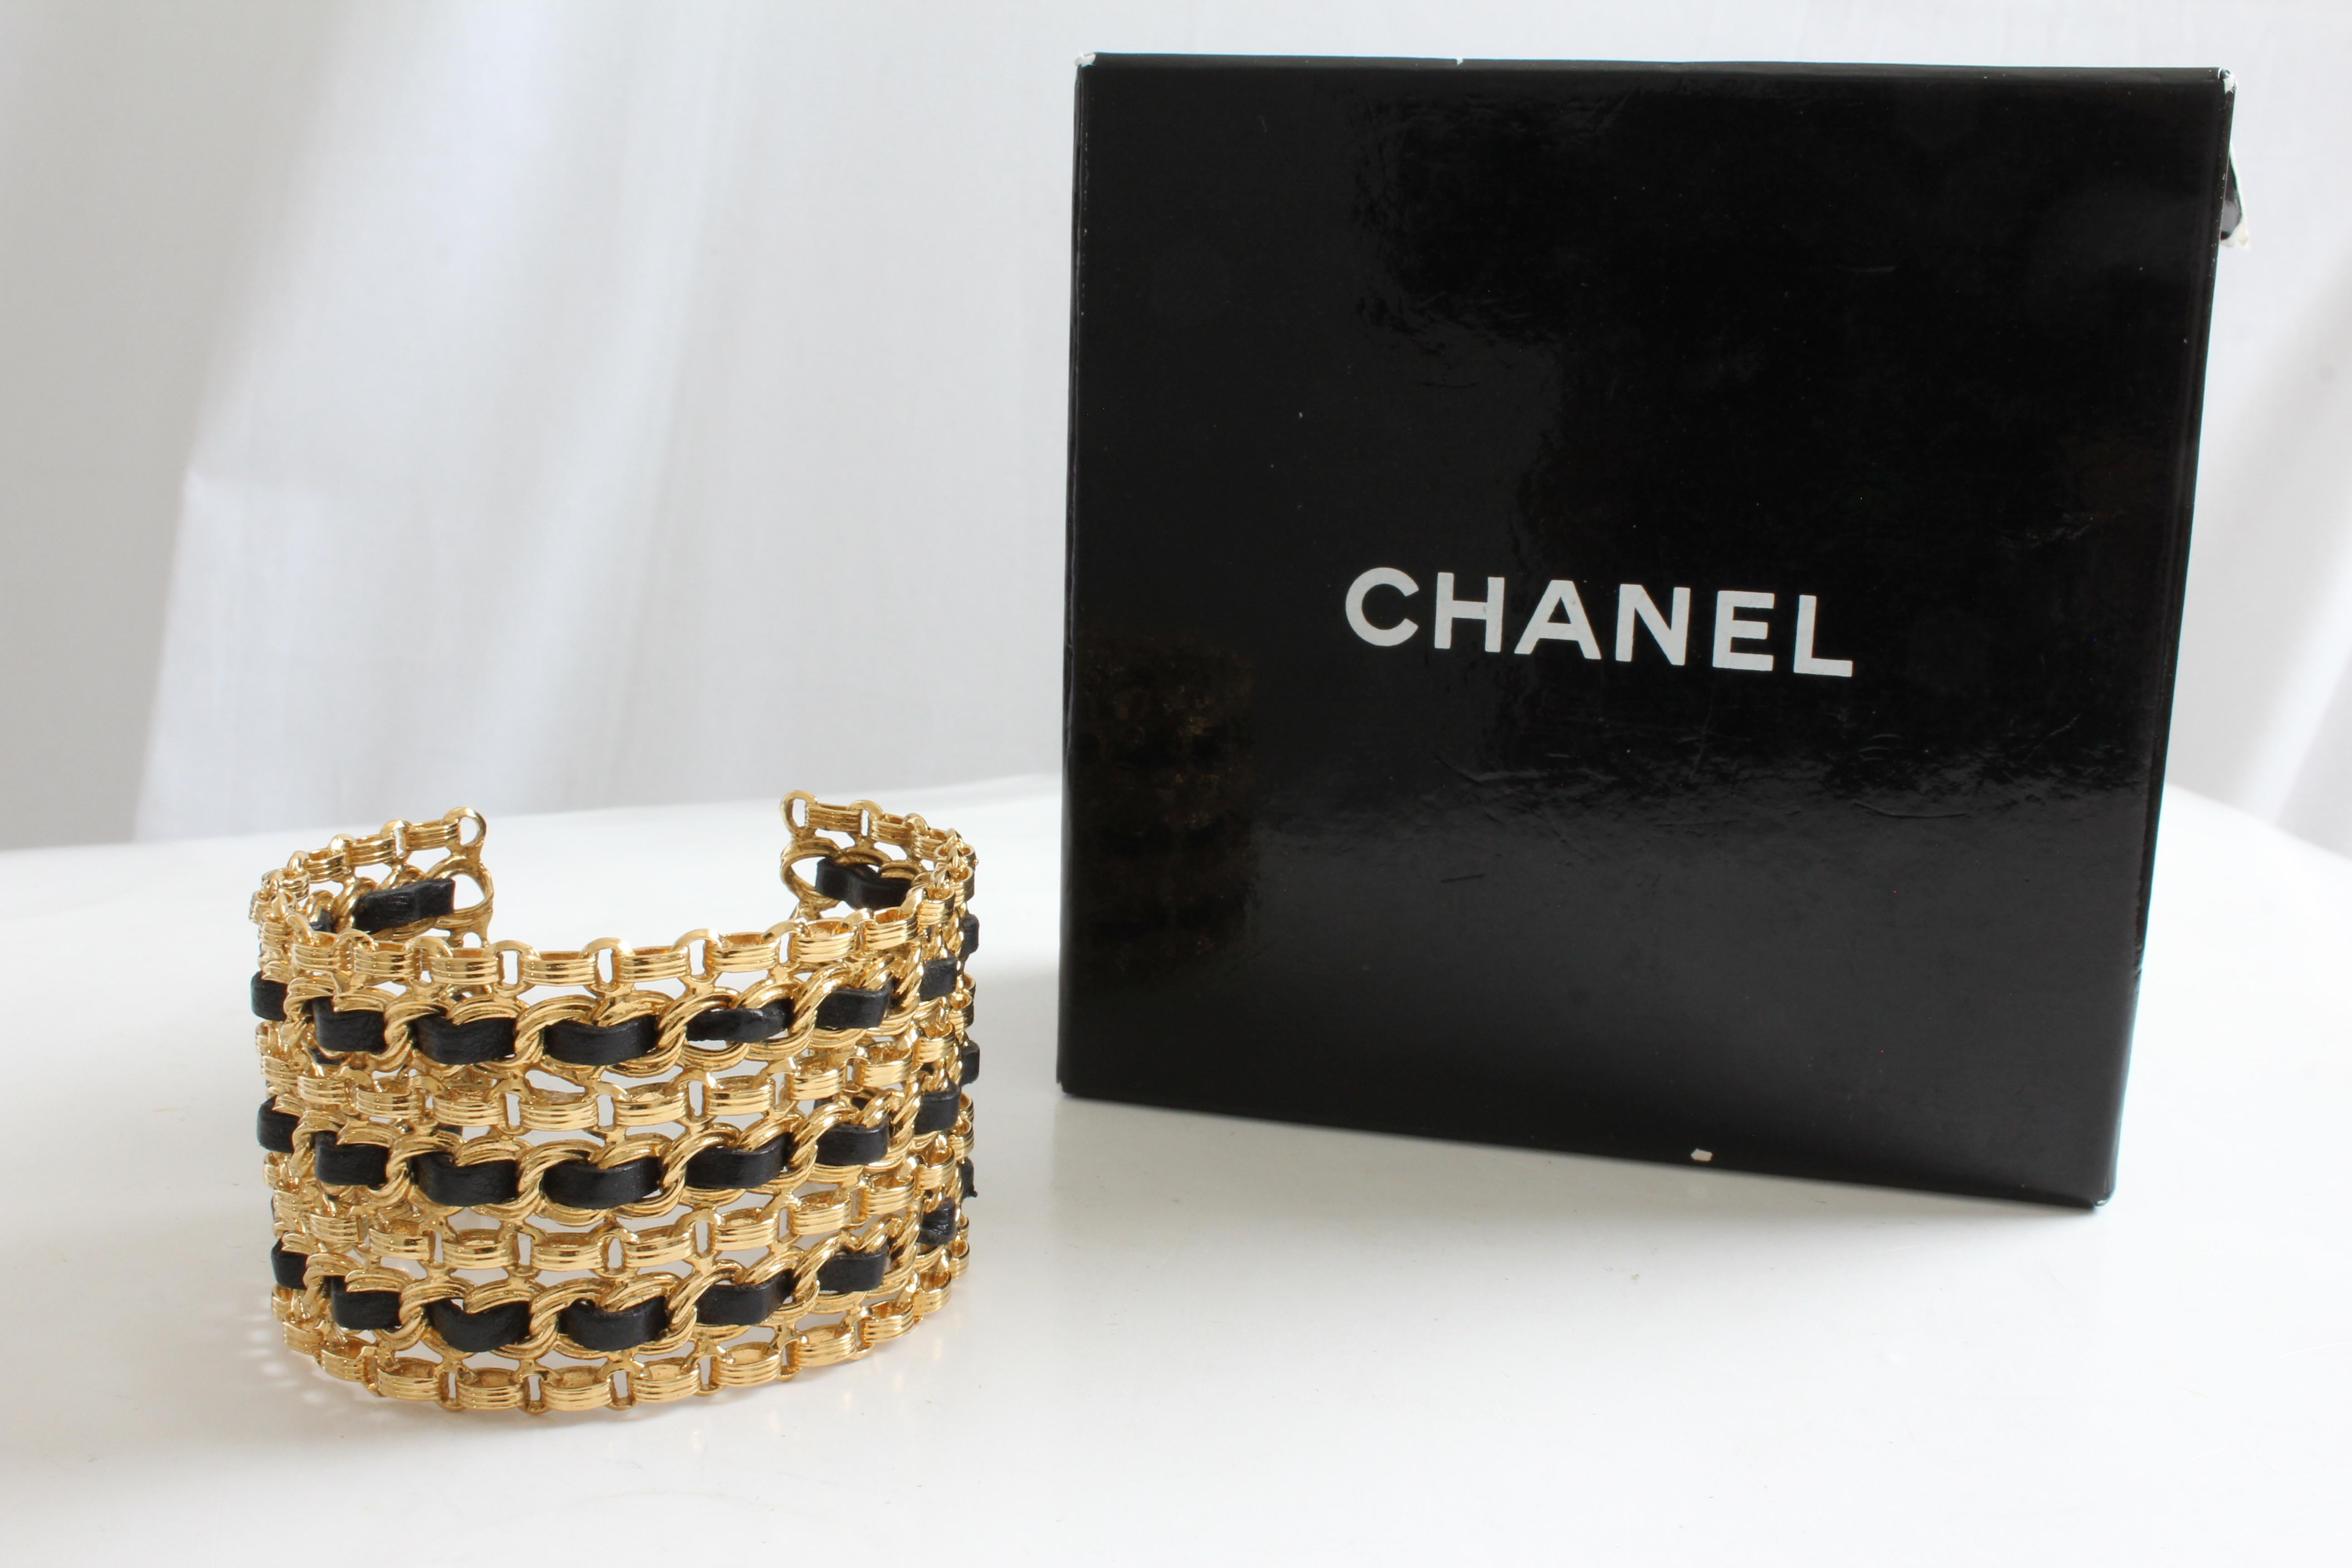 This fabulous wide cuff bracelet was made by Chanel, likely in the late 70s or early 1980s, Made from gold metal chains, it features black leather strips interwoven throughout. In very good preowned condition given its age with minimal signs of